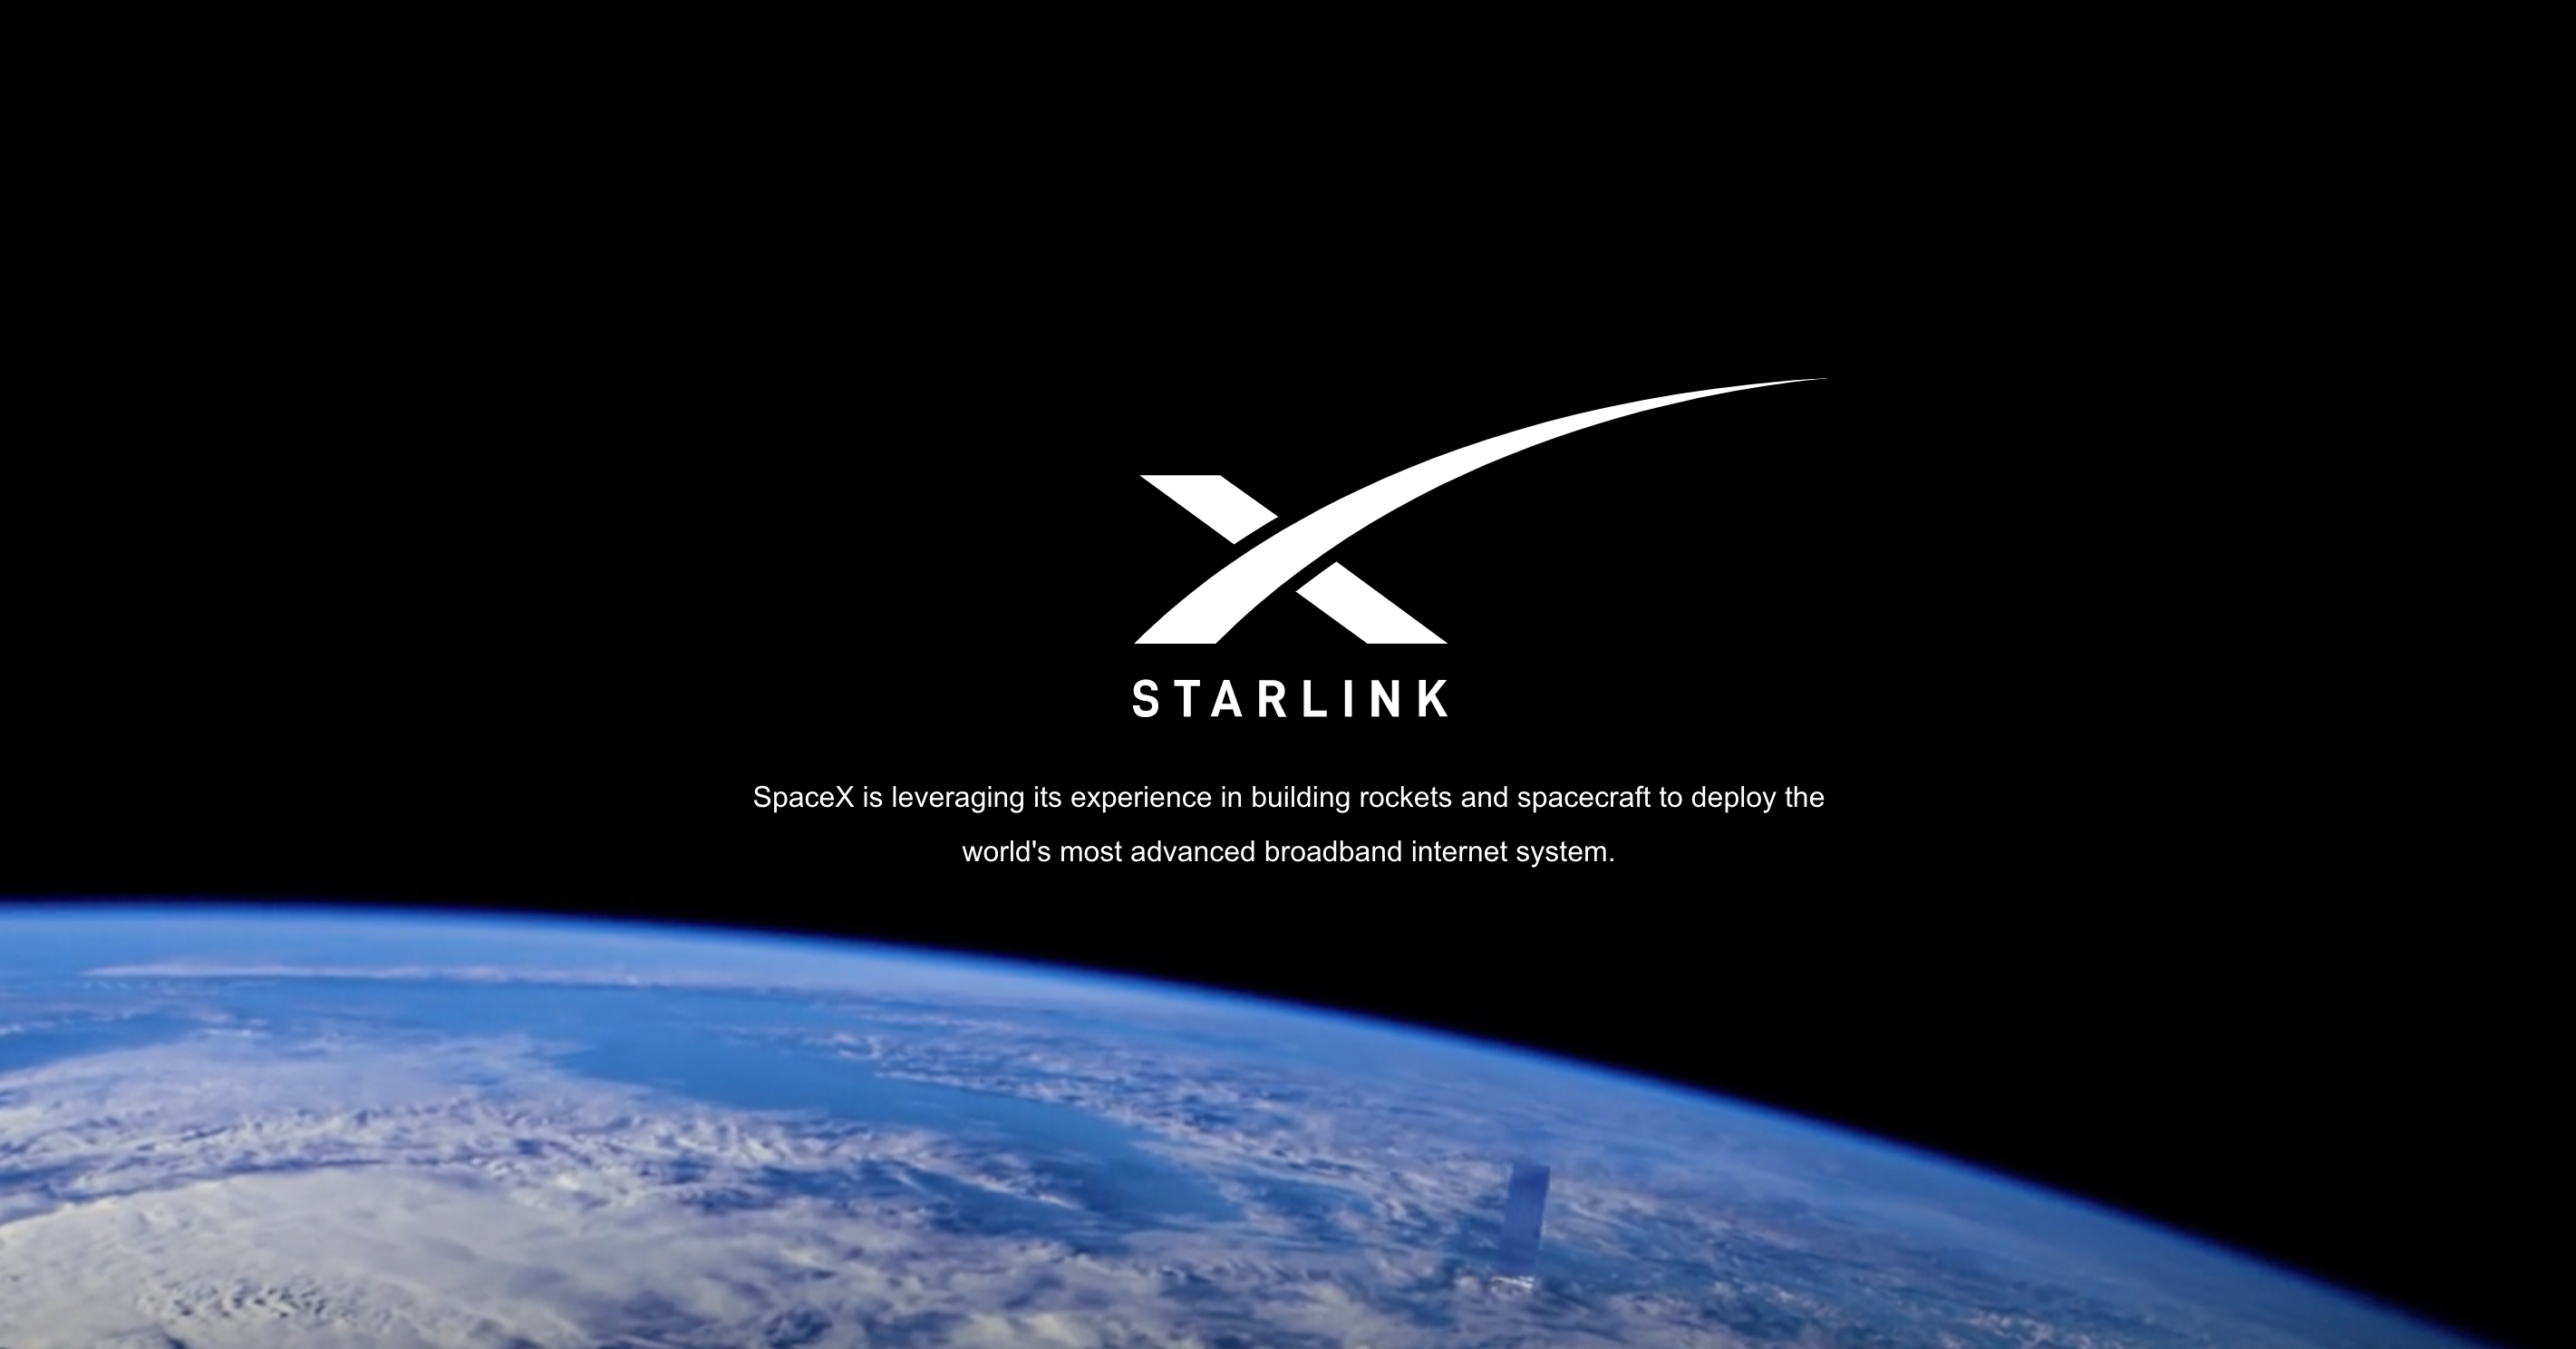 Over Half A Million Customers Pre-Ordered SpaceX's Starlink Internet Service